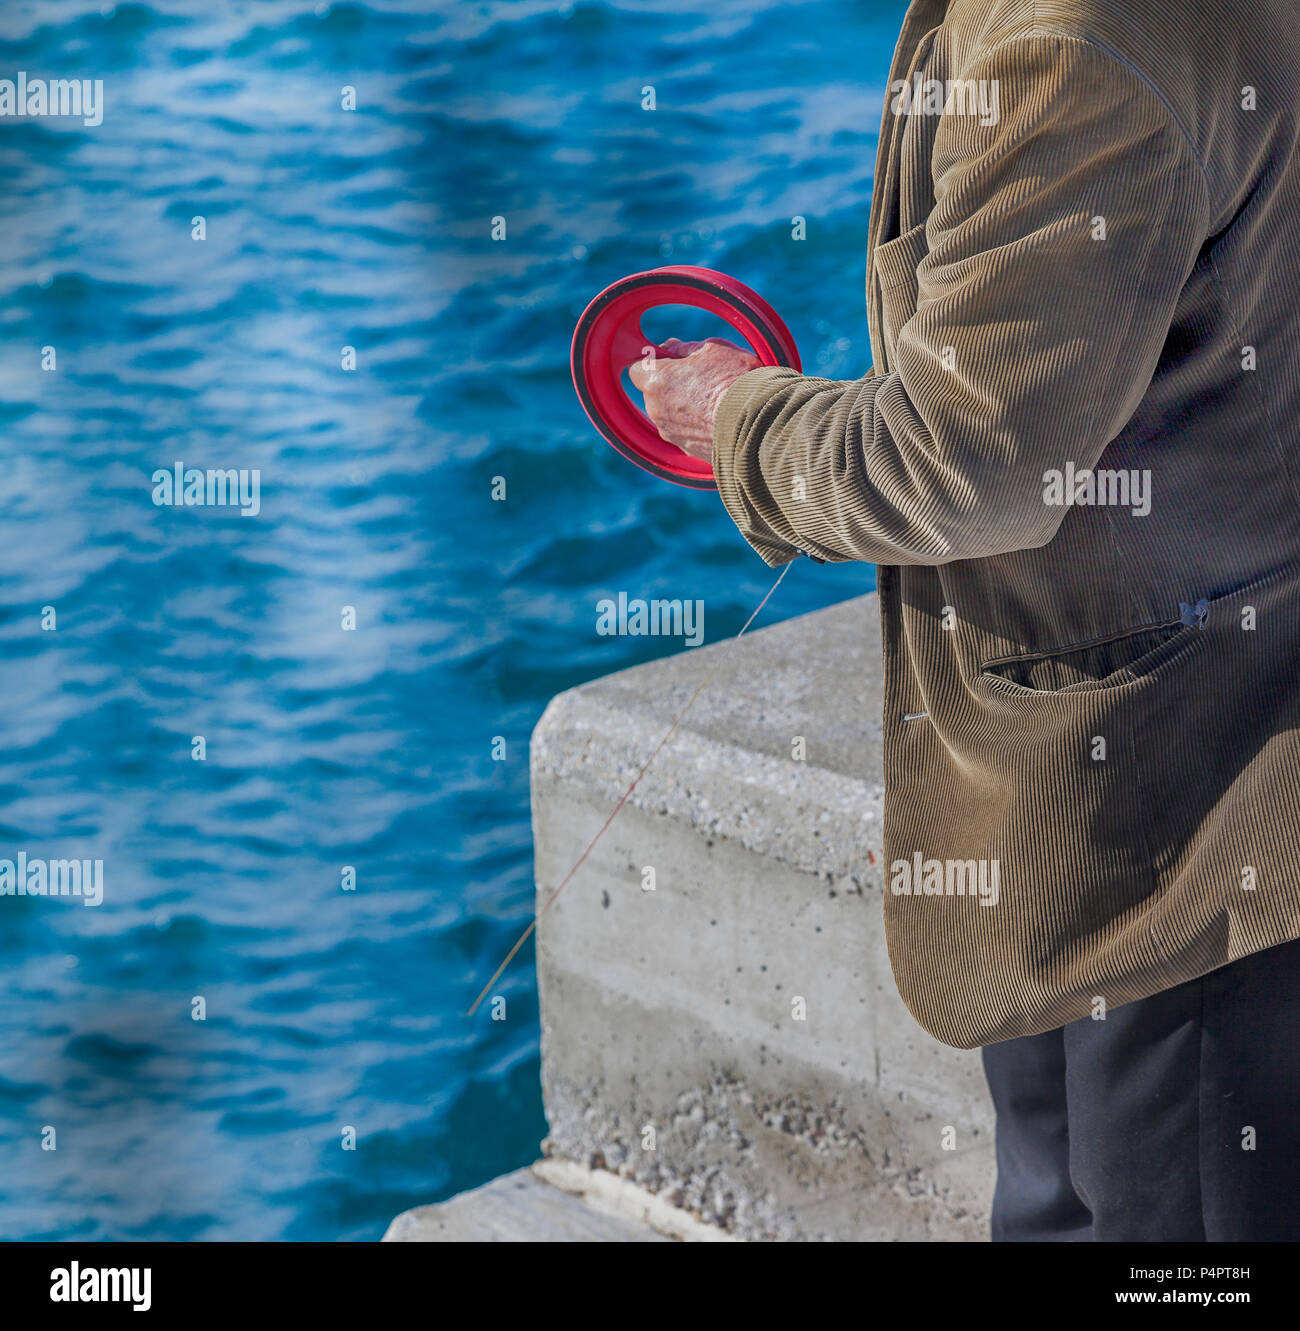 Man fishing. Senior adult male fishing standing up with a nylon reel in the Mediterranean Sea. Stock Image. Stock Photo